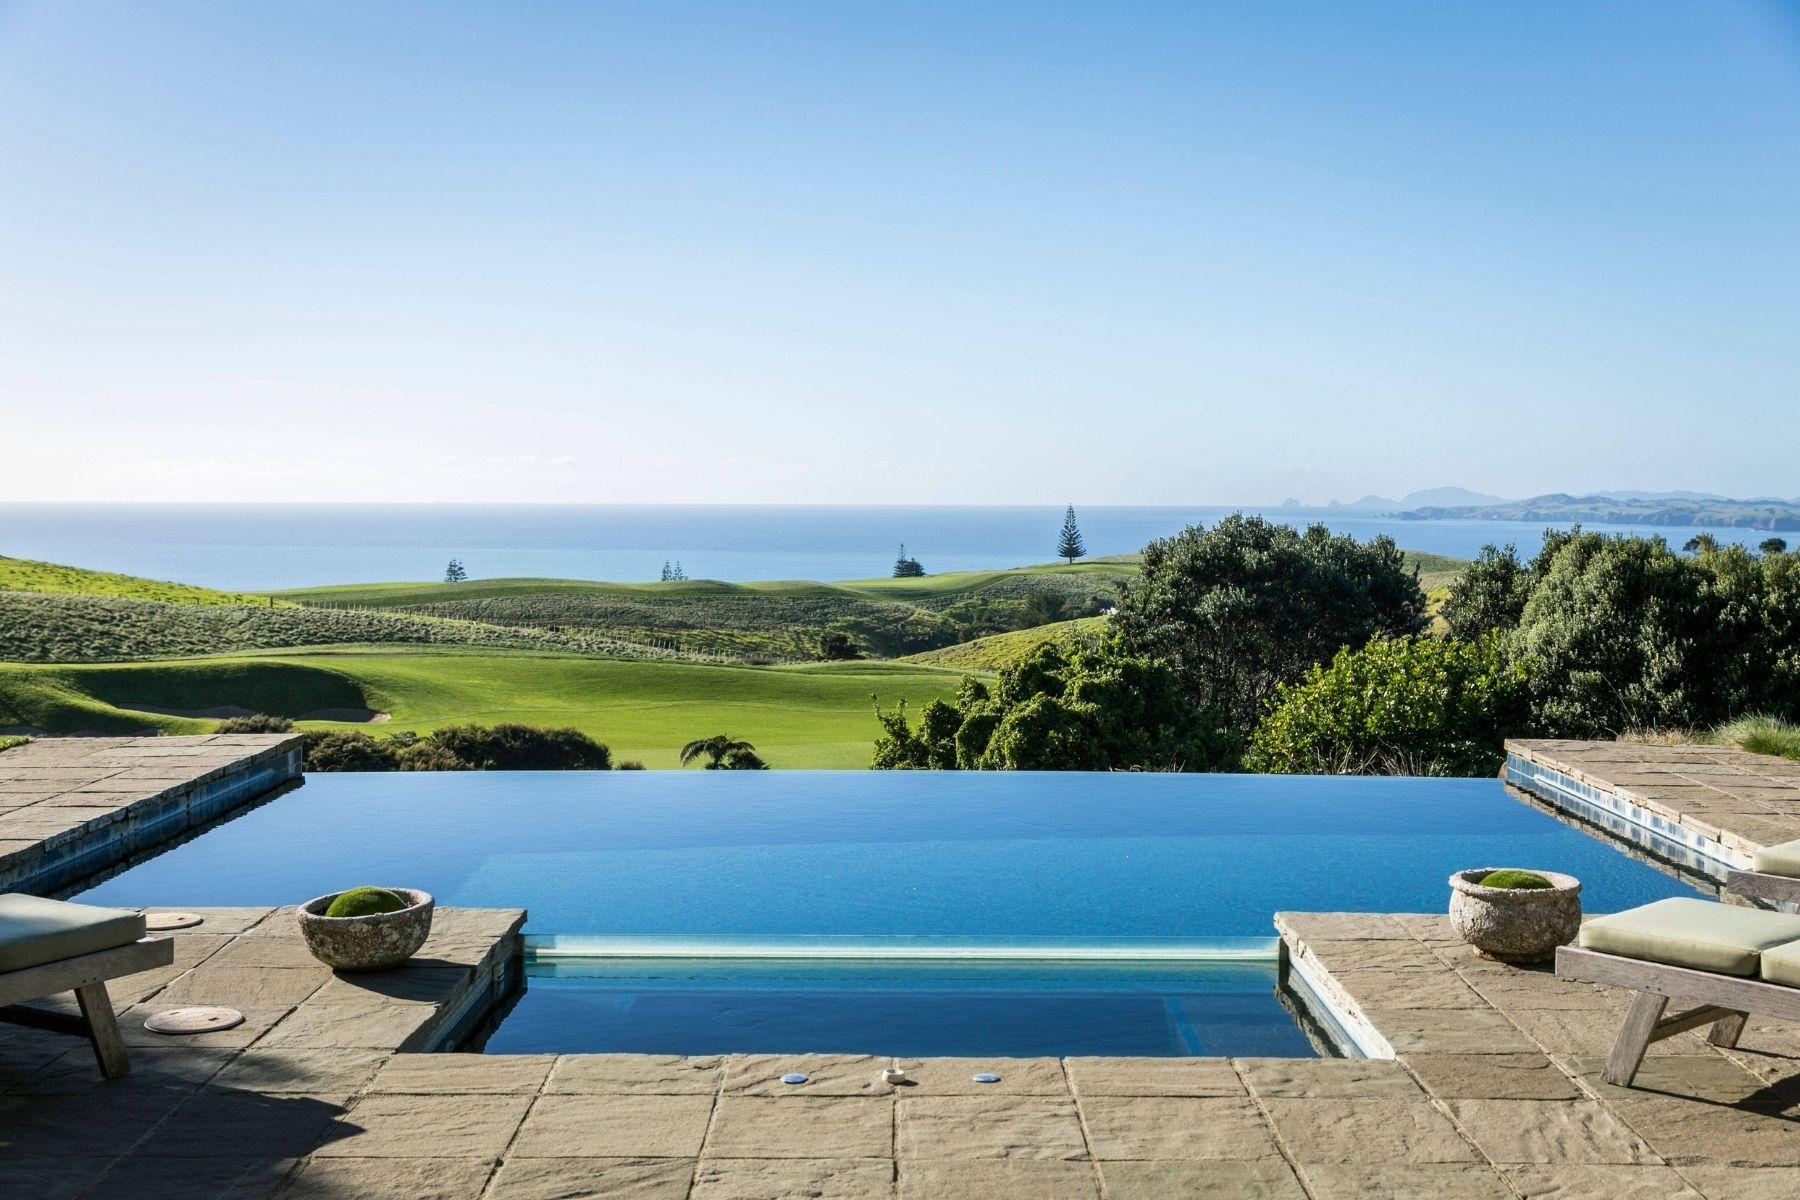 Luxury Lodge in New Zealand - The Lodge at Kauri Cliffs